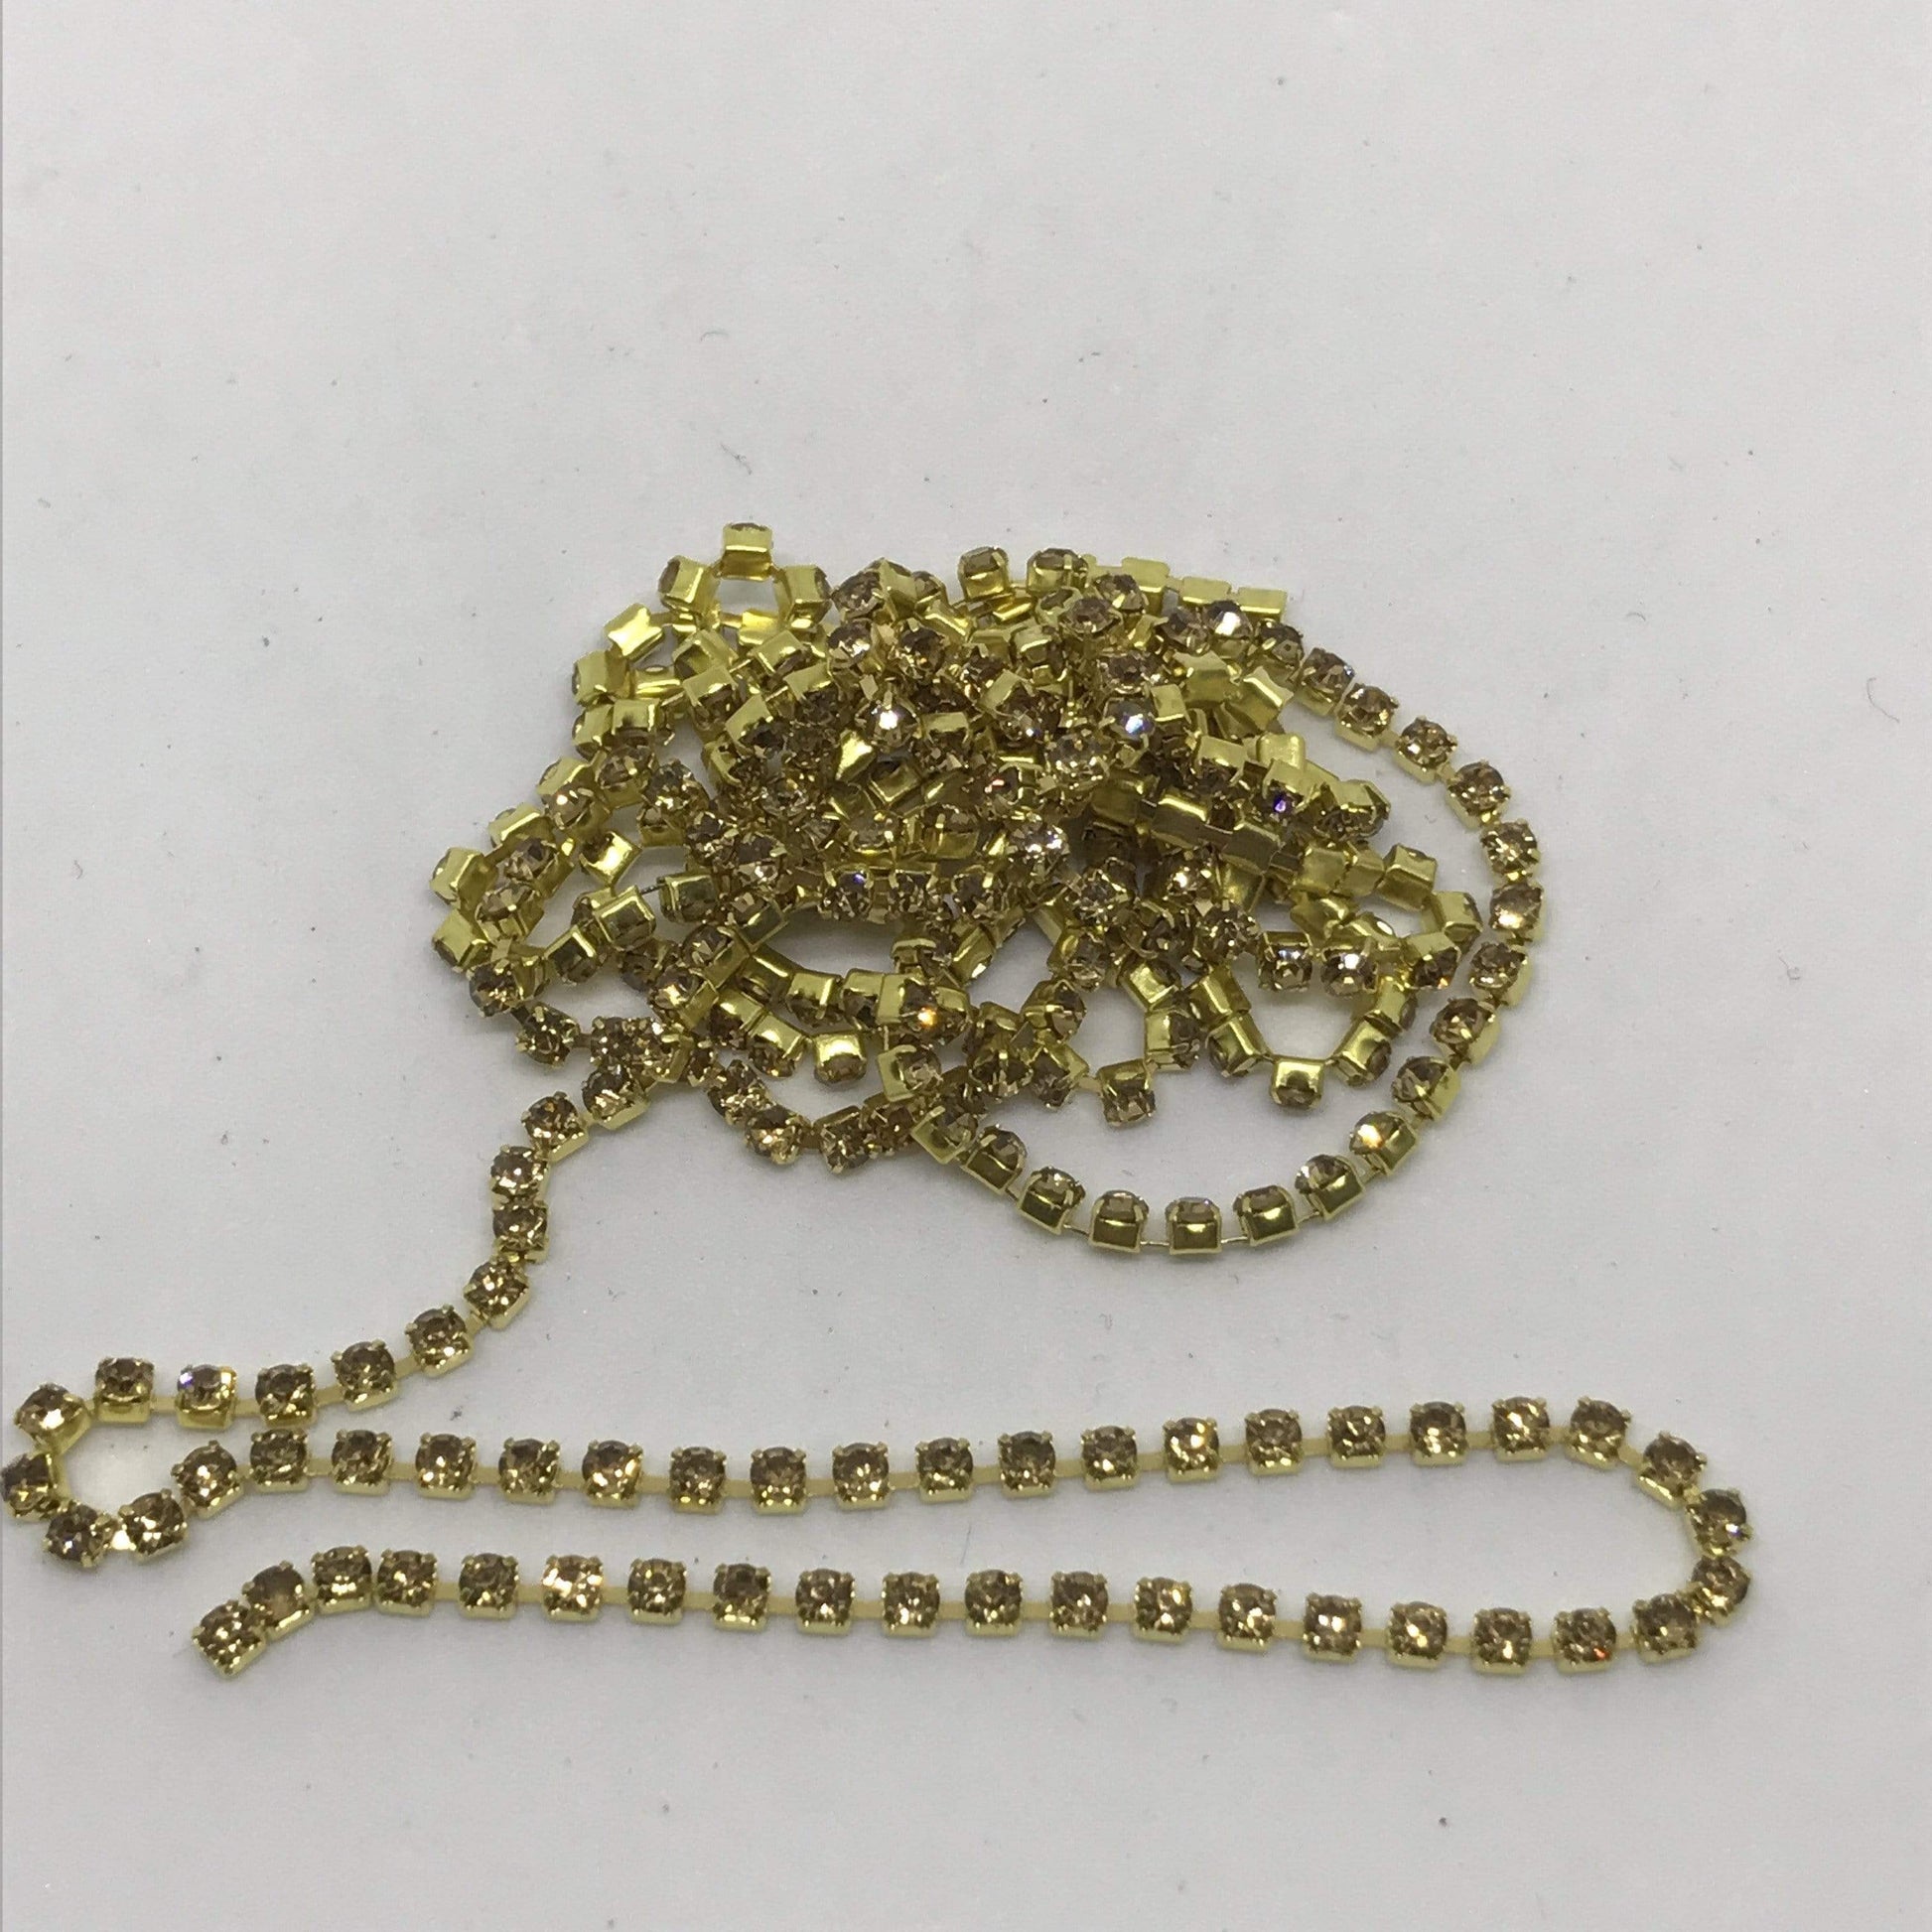 Grey / Gold Ss6 Grey Stone on GOLD Metal Rhinestone Chain SS6 Metal Rhinestone Chain